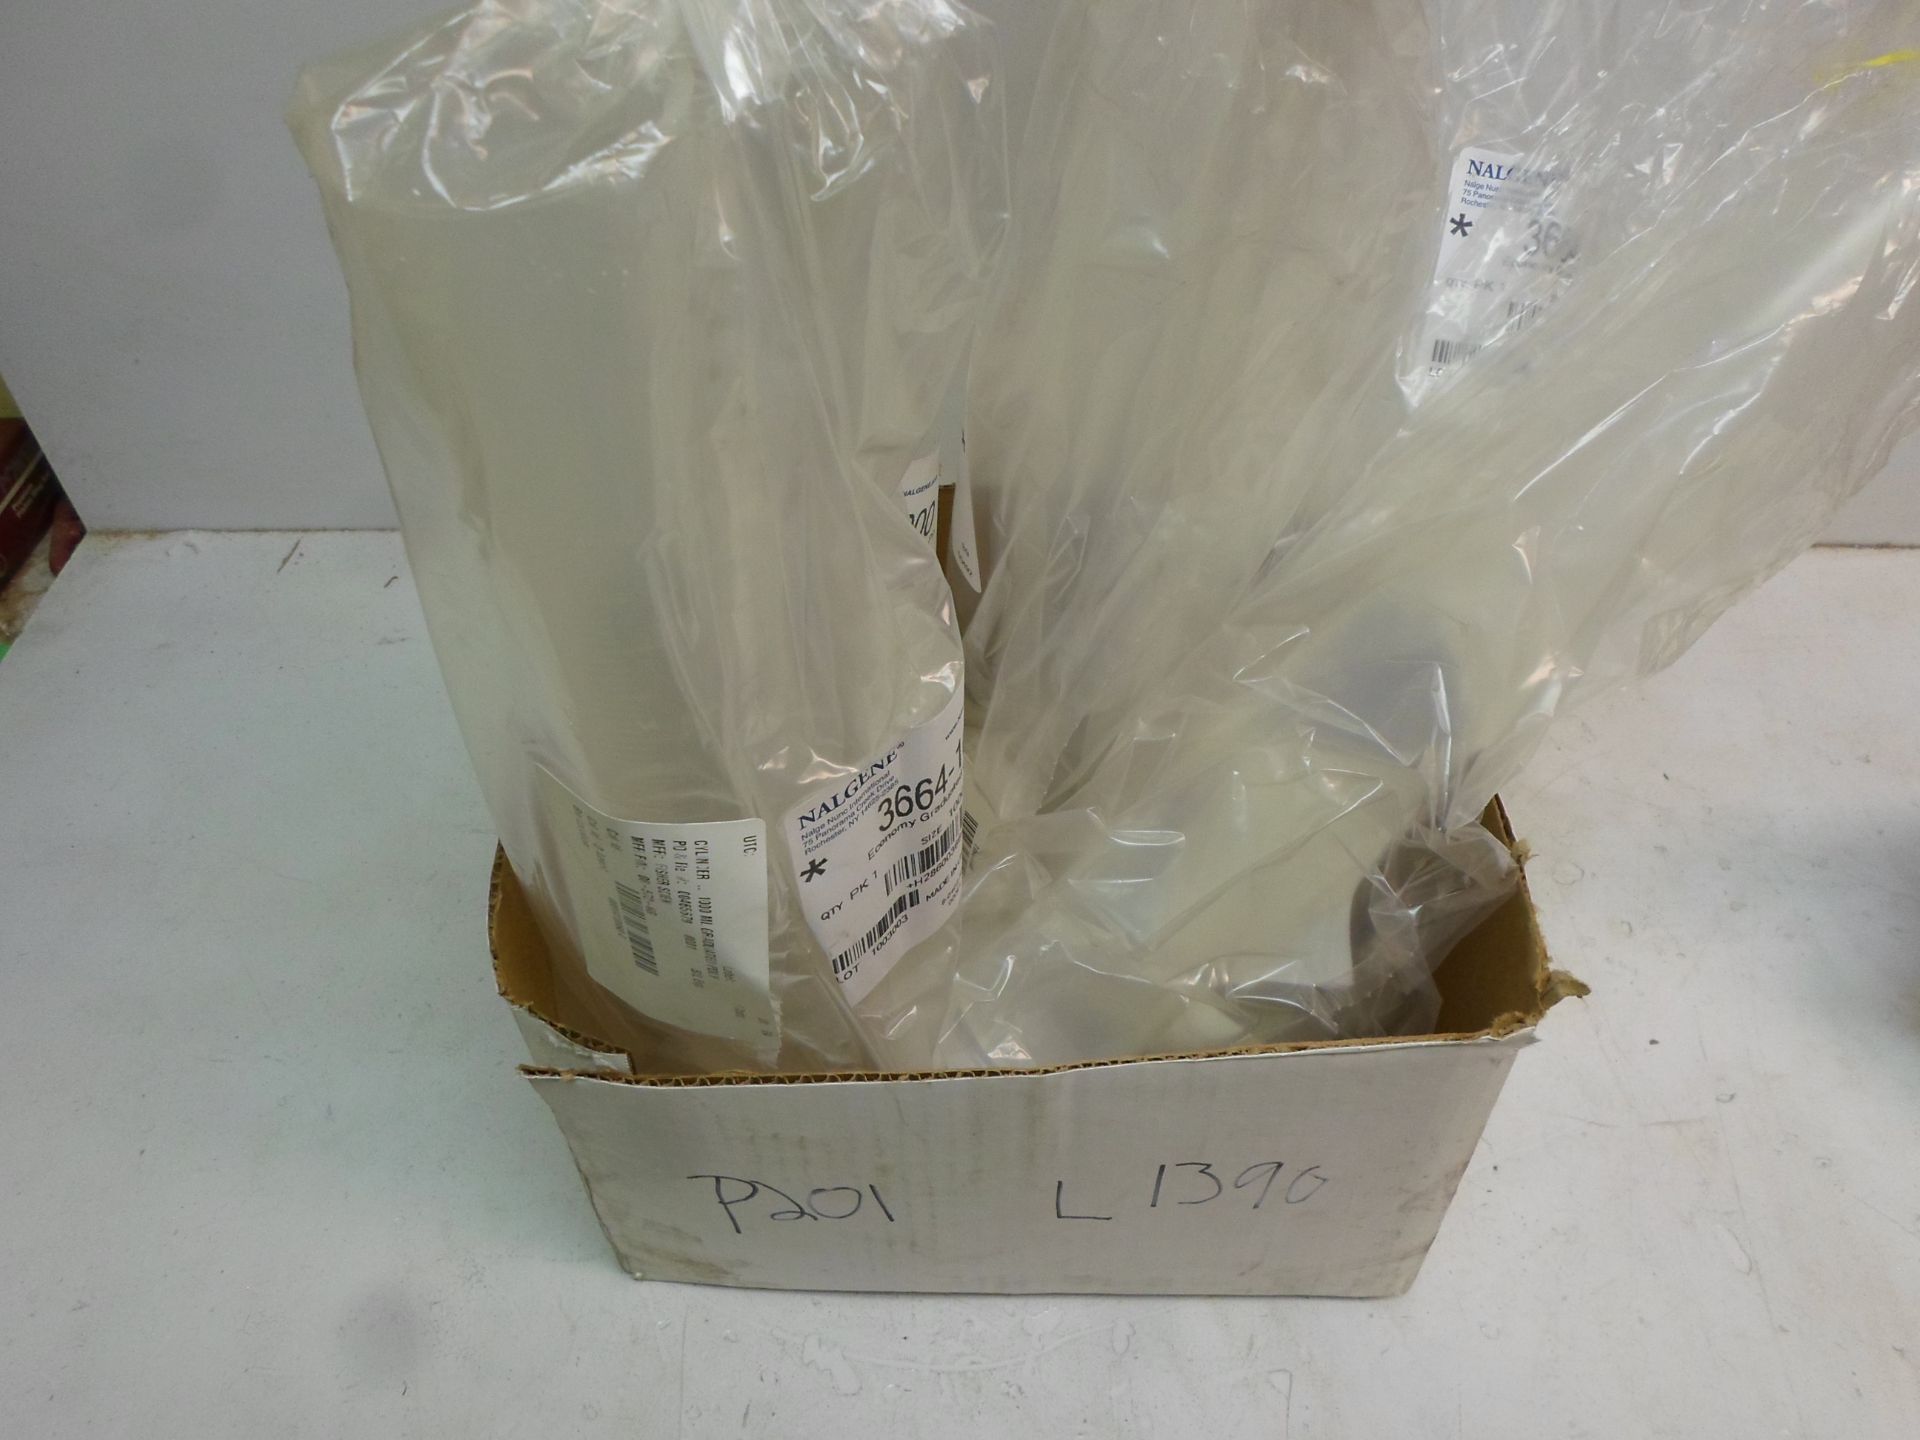 LOT OF FIVE ECONOMY GRADUATED CYLINDER PP 3664-1000